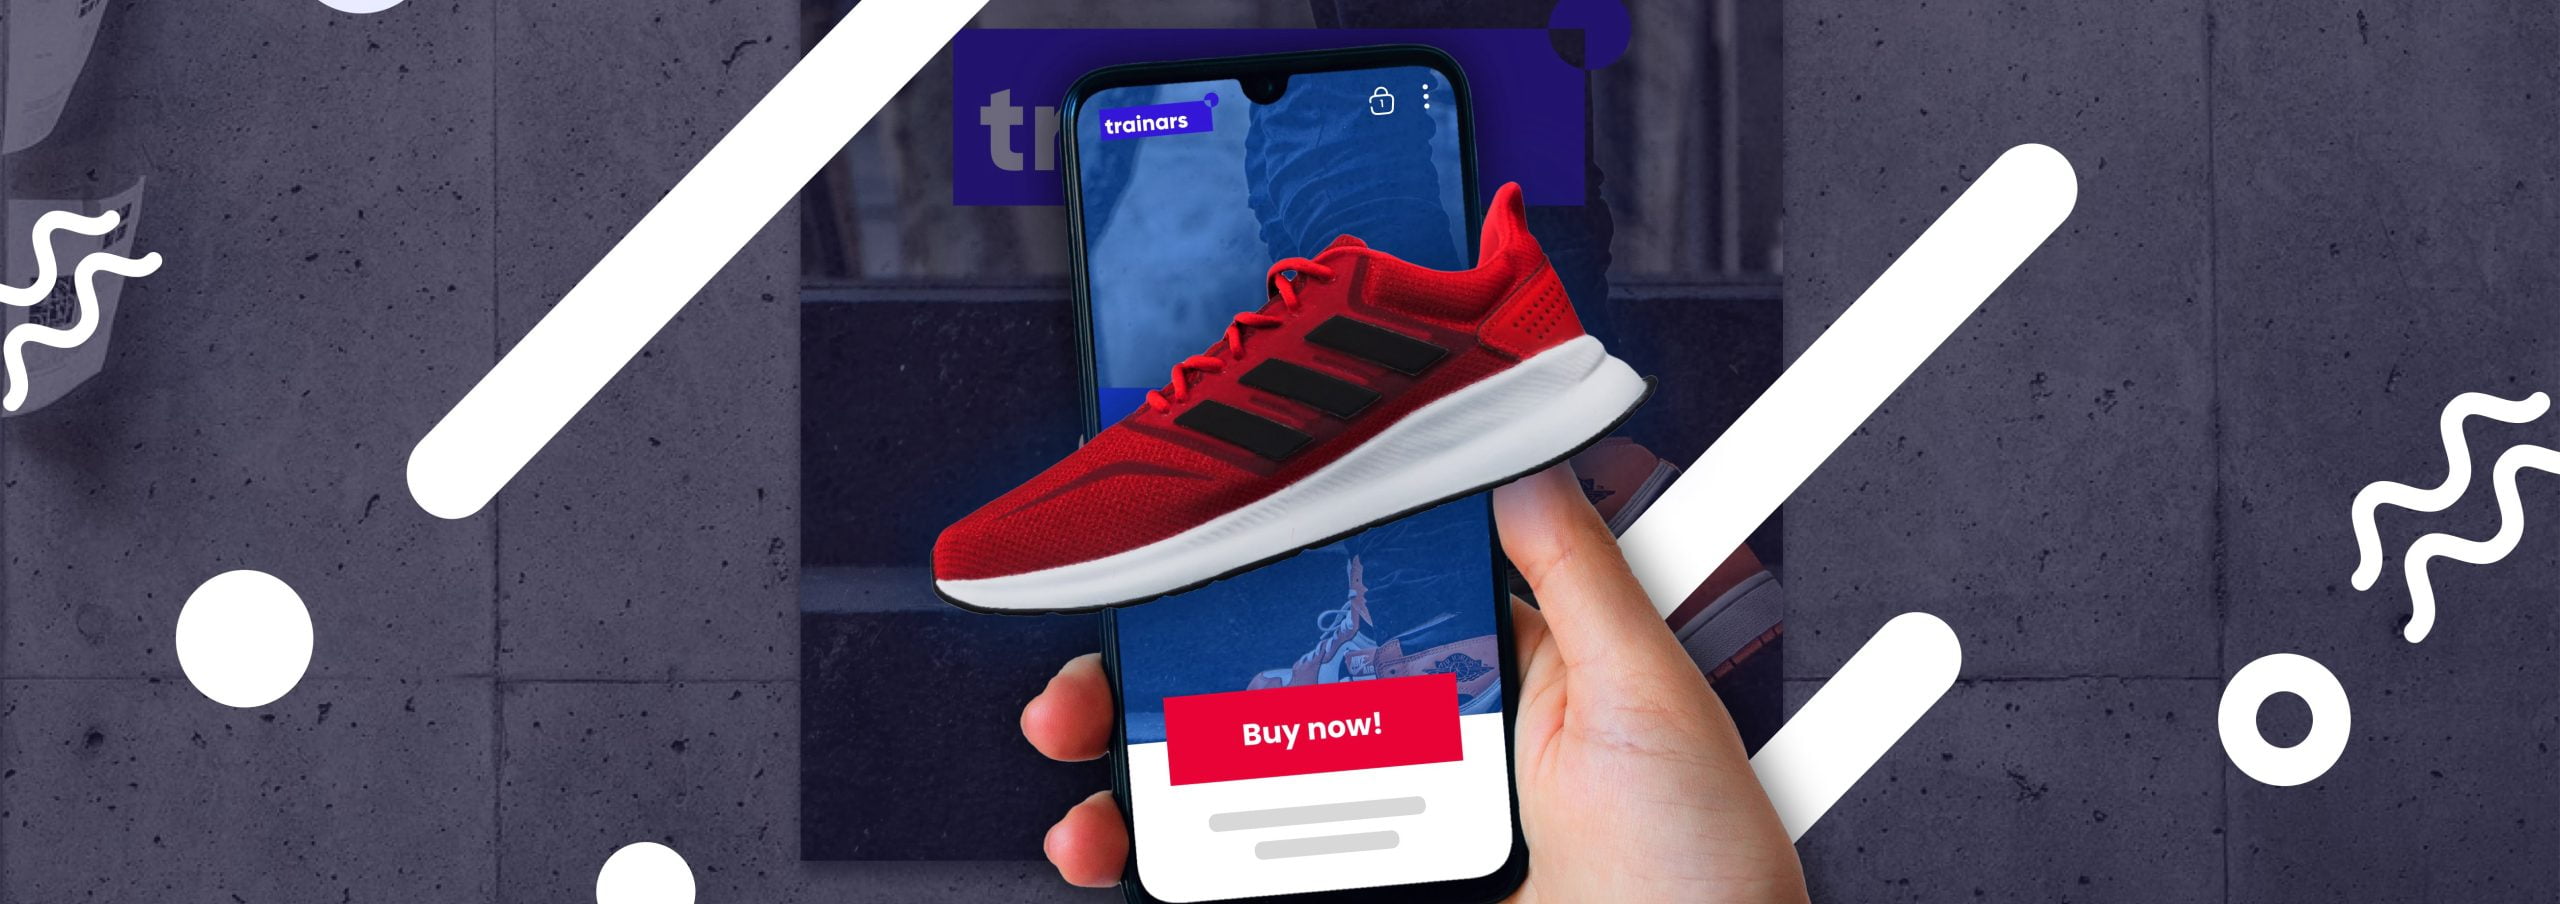 Augmented reality in ecommerce